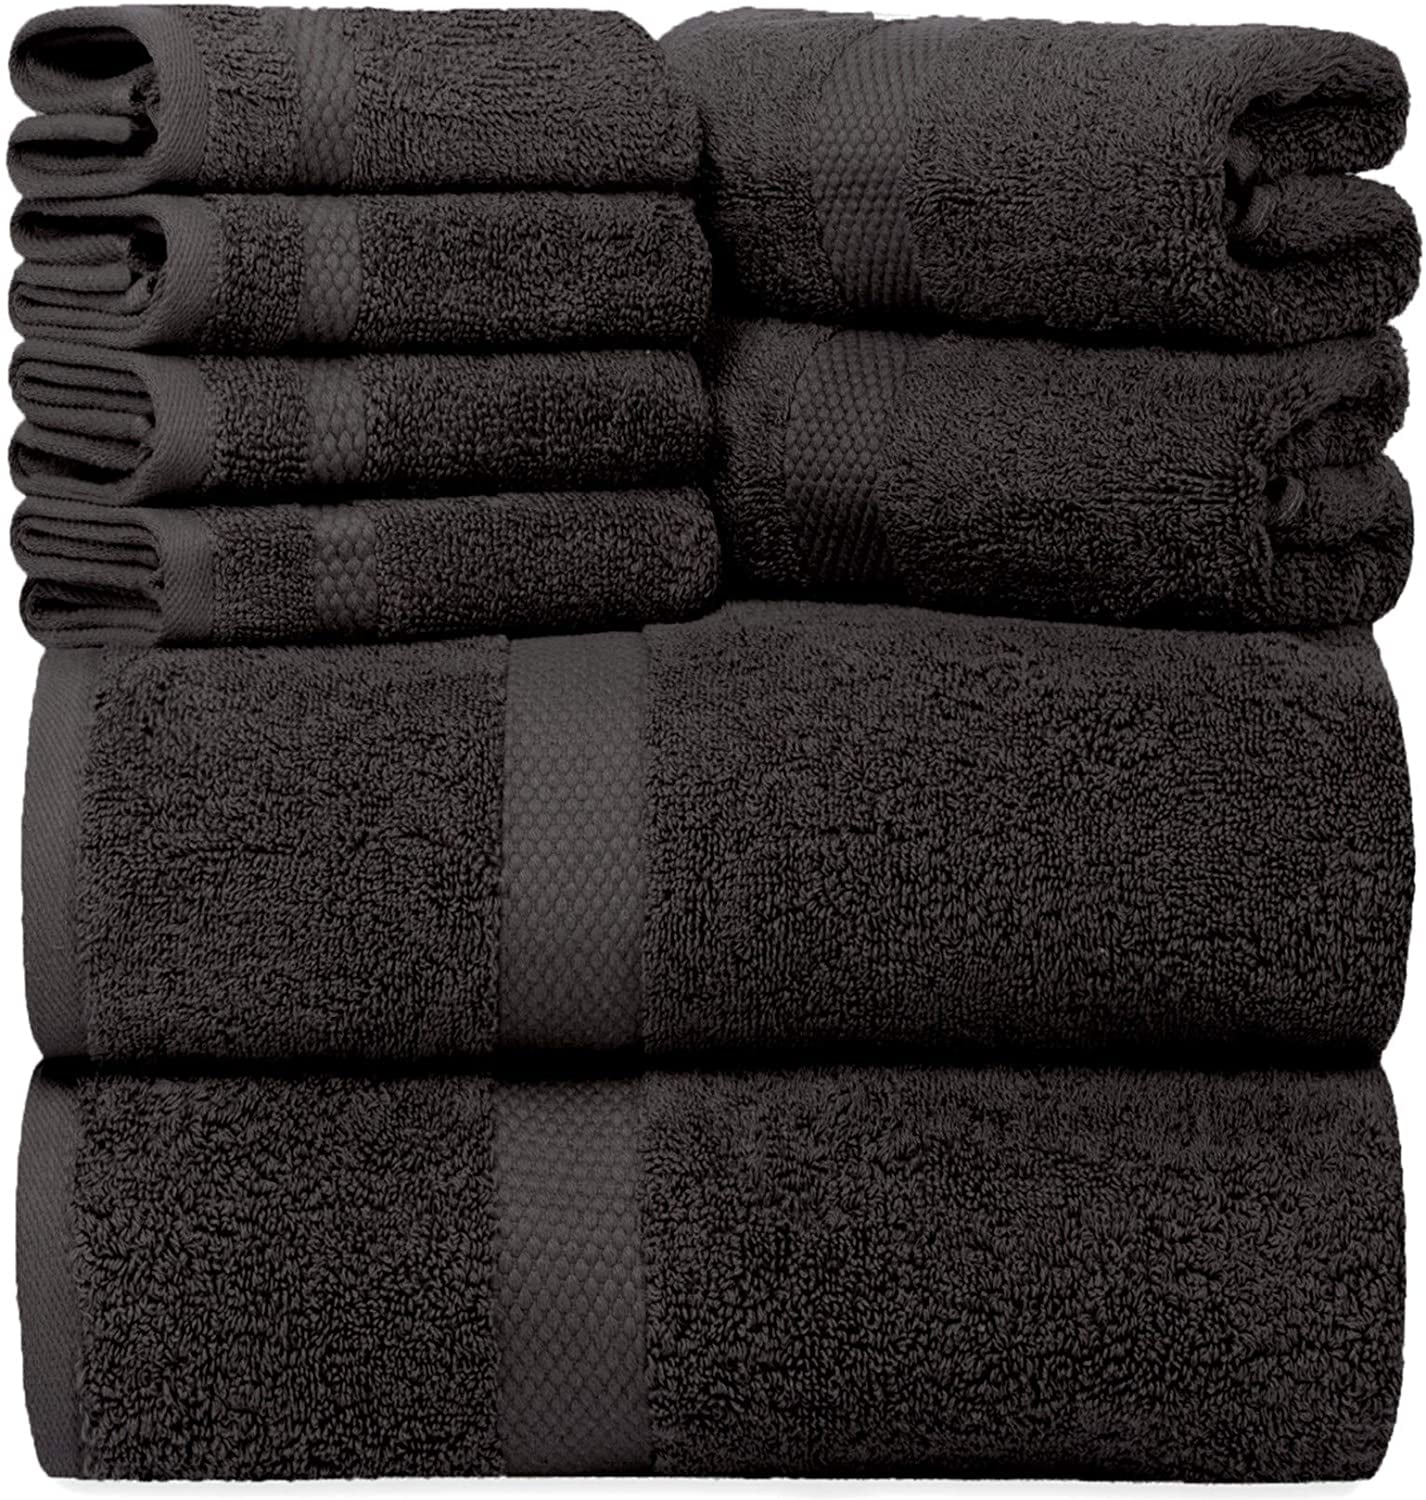 MKHERT Black And White Squares Bath Towel Shower Towel Wash Cloth Face  Towels 16x28 inches